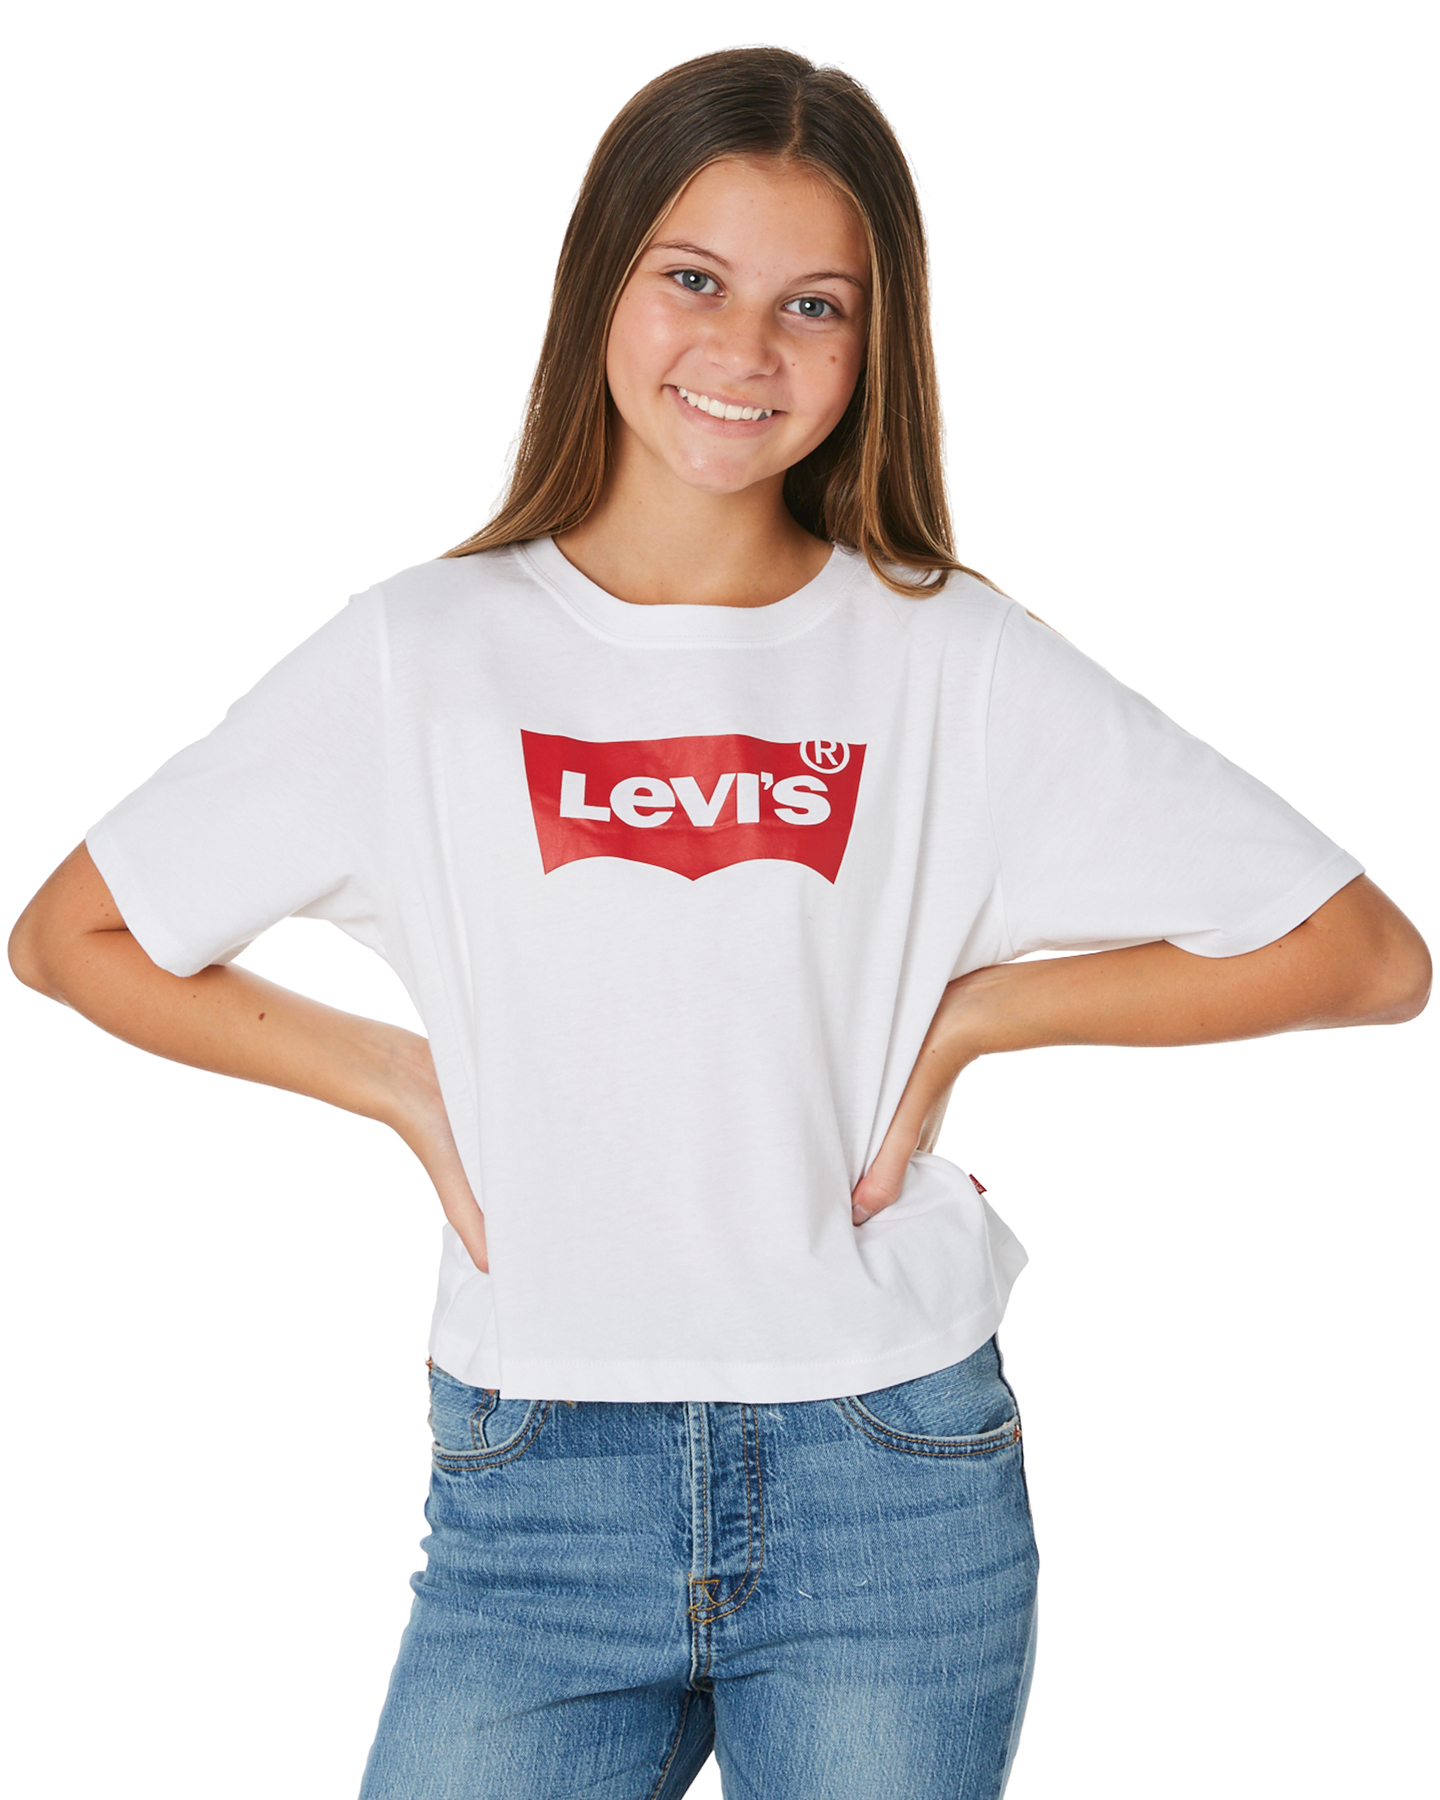 Levi's Girls Cropped Tee - Teens - White | SurfStitch